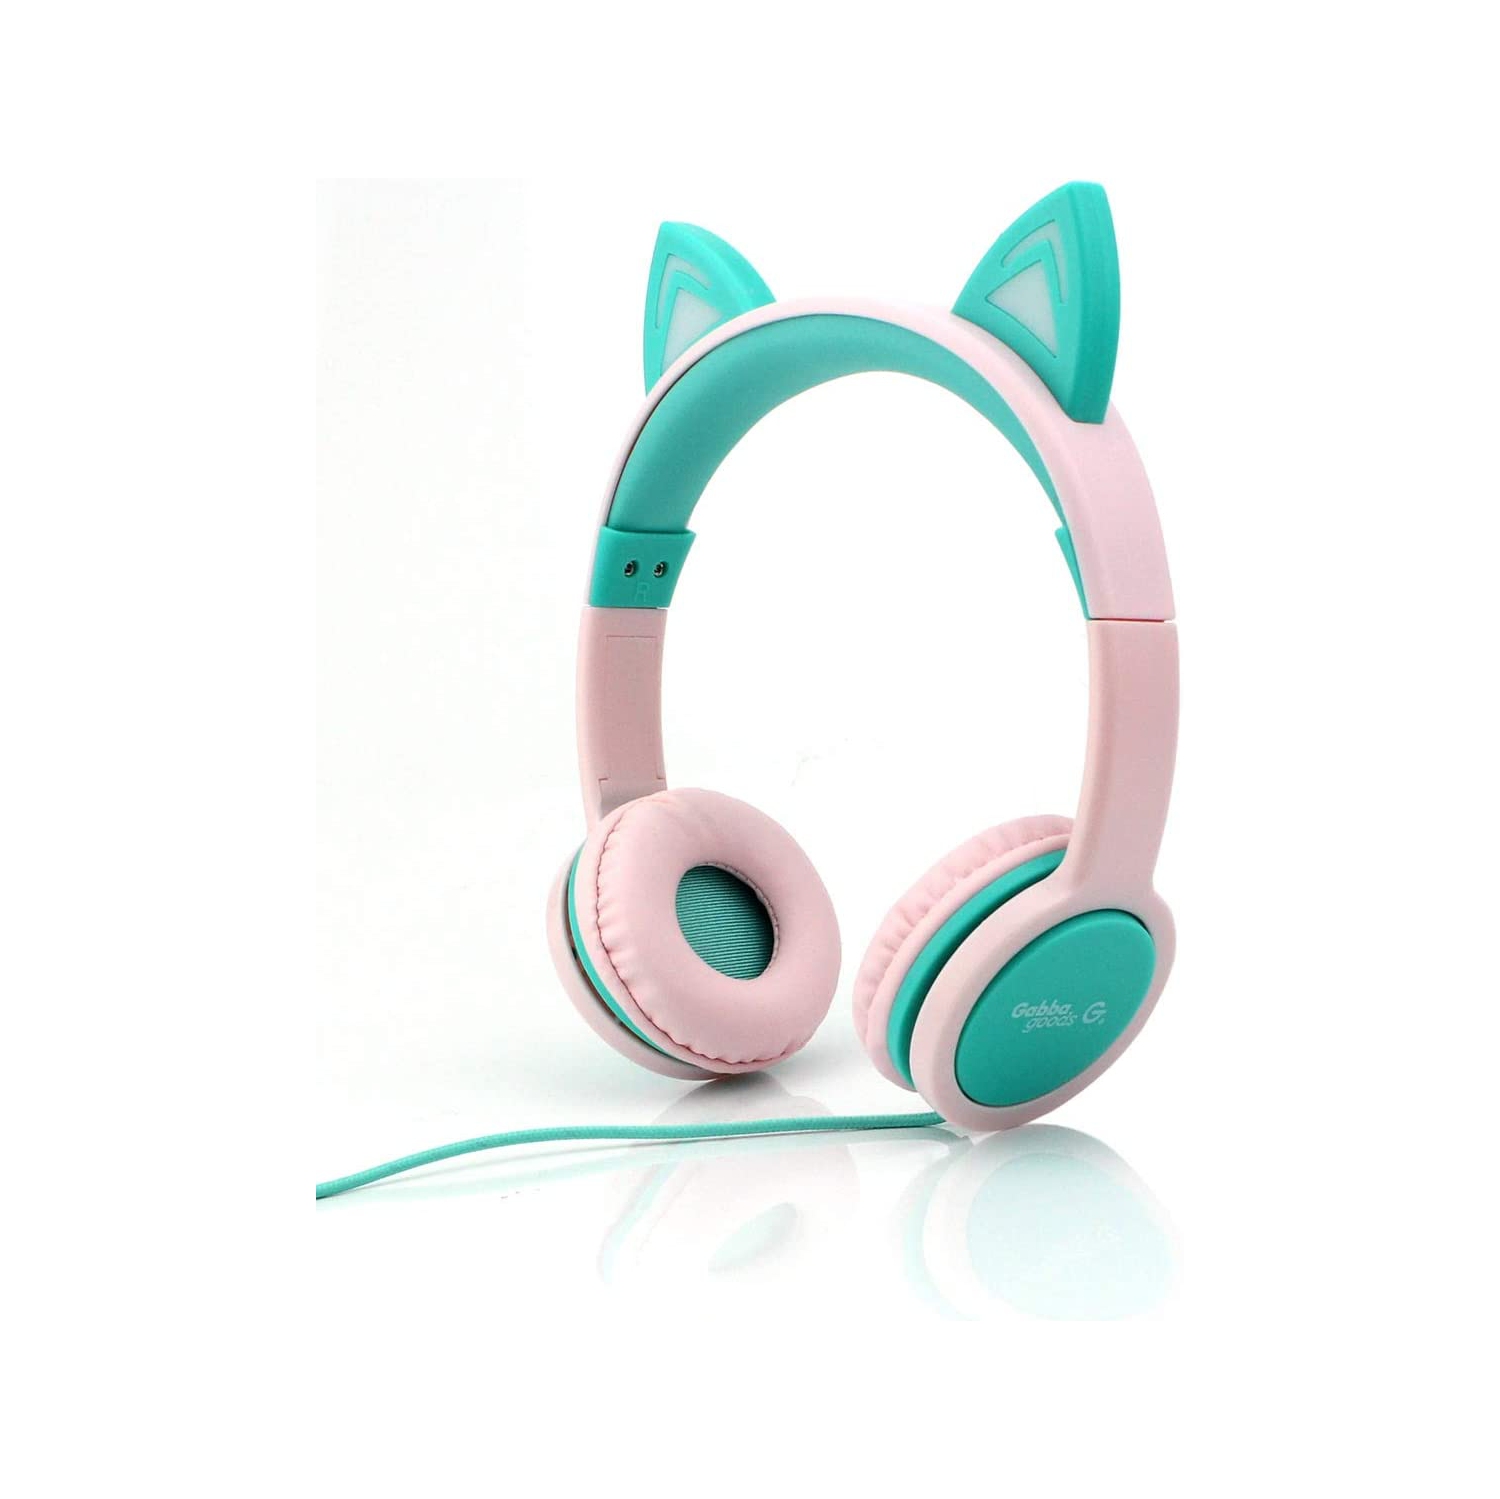 Gabba Goods Premium Kid's/Children's Safe Sound LED Light Up in The Dark Cat Over The Ear Comfort Padded Stereo Headphones with AUX Cable | Earphones - 85 Decibels(Green)